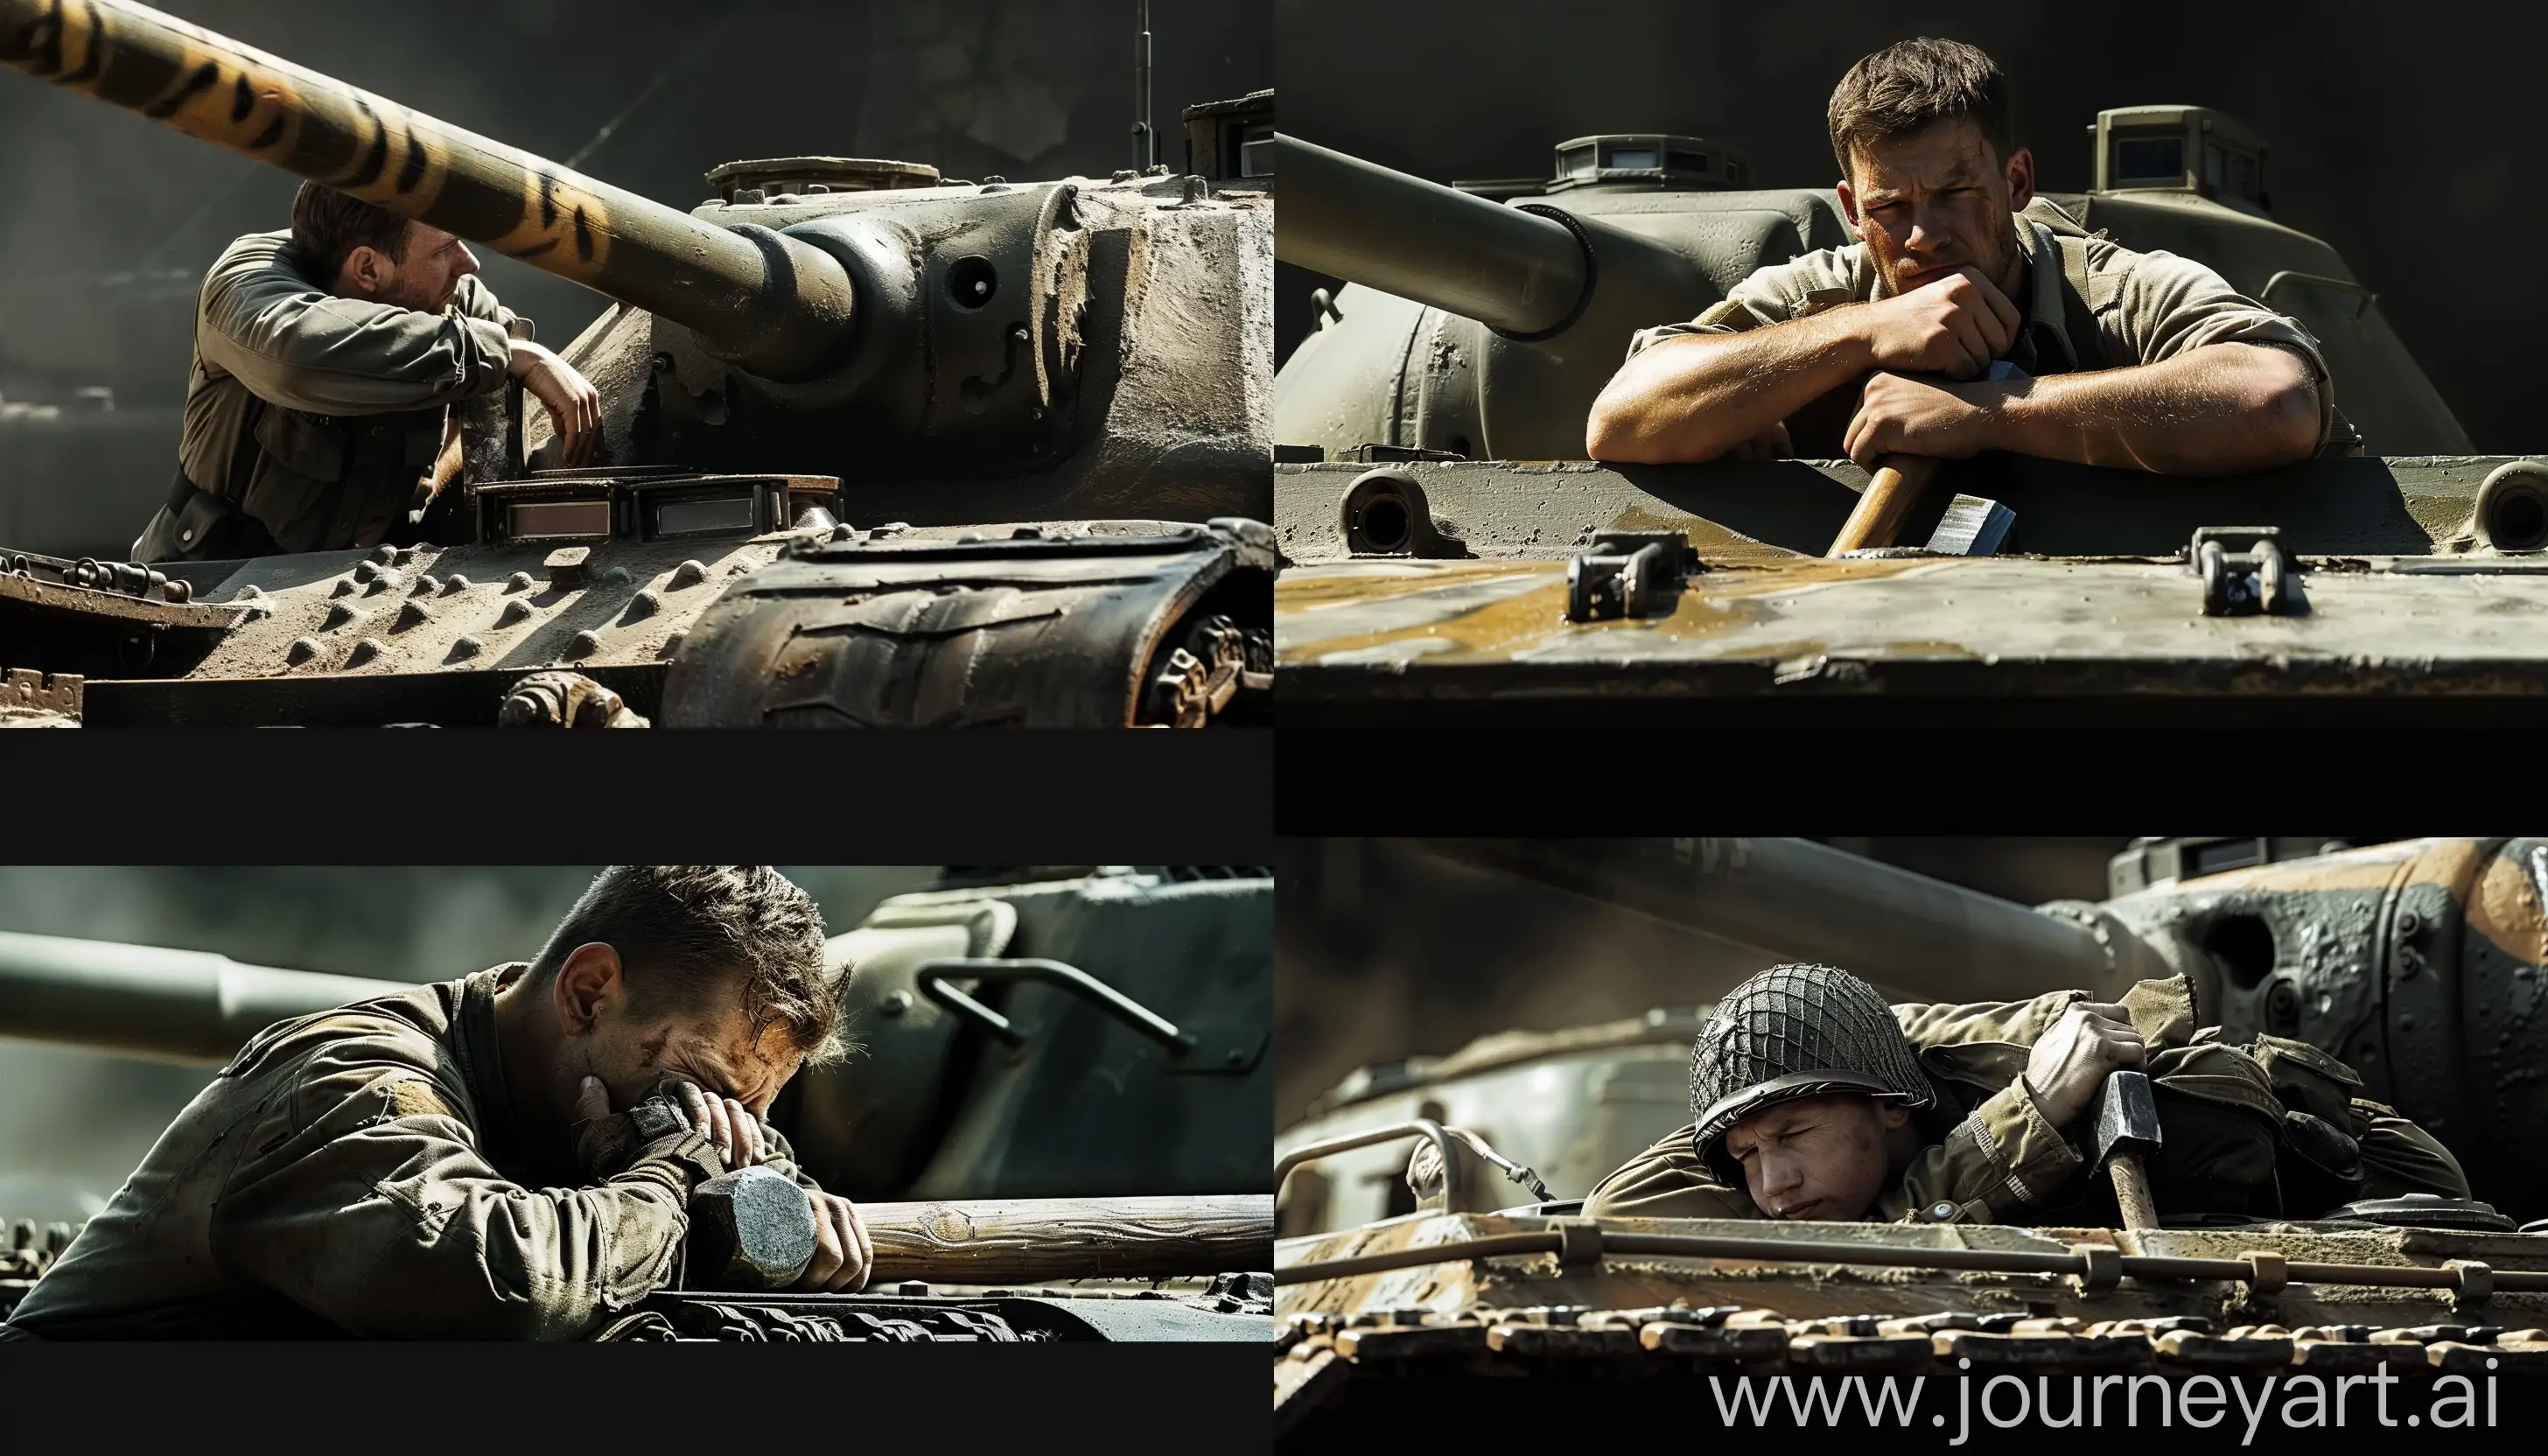 A cinematic photo of a soldier leaning on the sledgehammer of a German Tiger tank from World War II, sunlight illumination, honor, inspiration --sref https://cinescopia.com/wp-content/uploads/2015/01/fury__2014__wallpaper_1920x1080_by_sachso74-d7y25dj.jpg --v 6 --style raw --ar 7:4